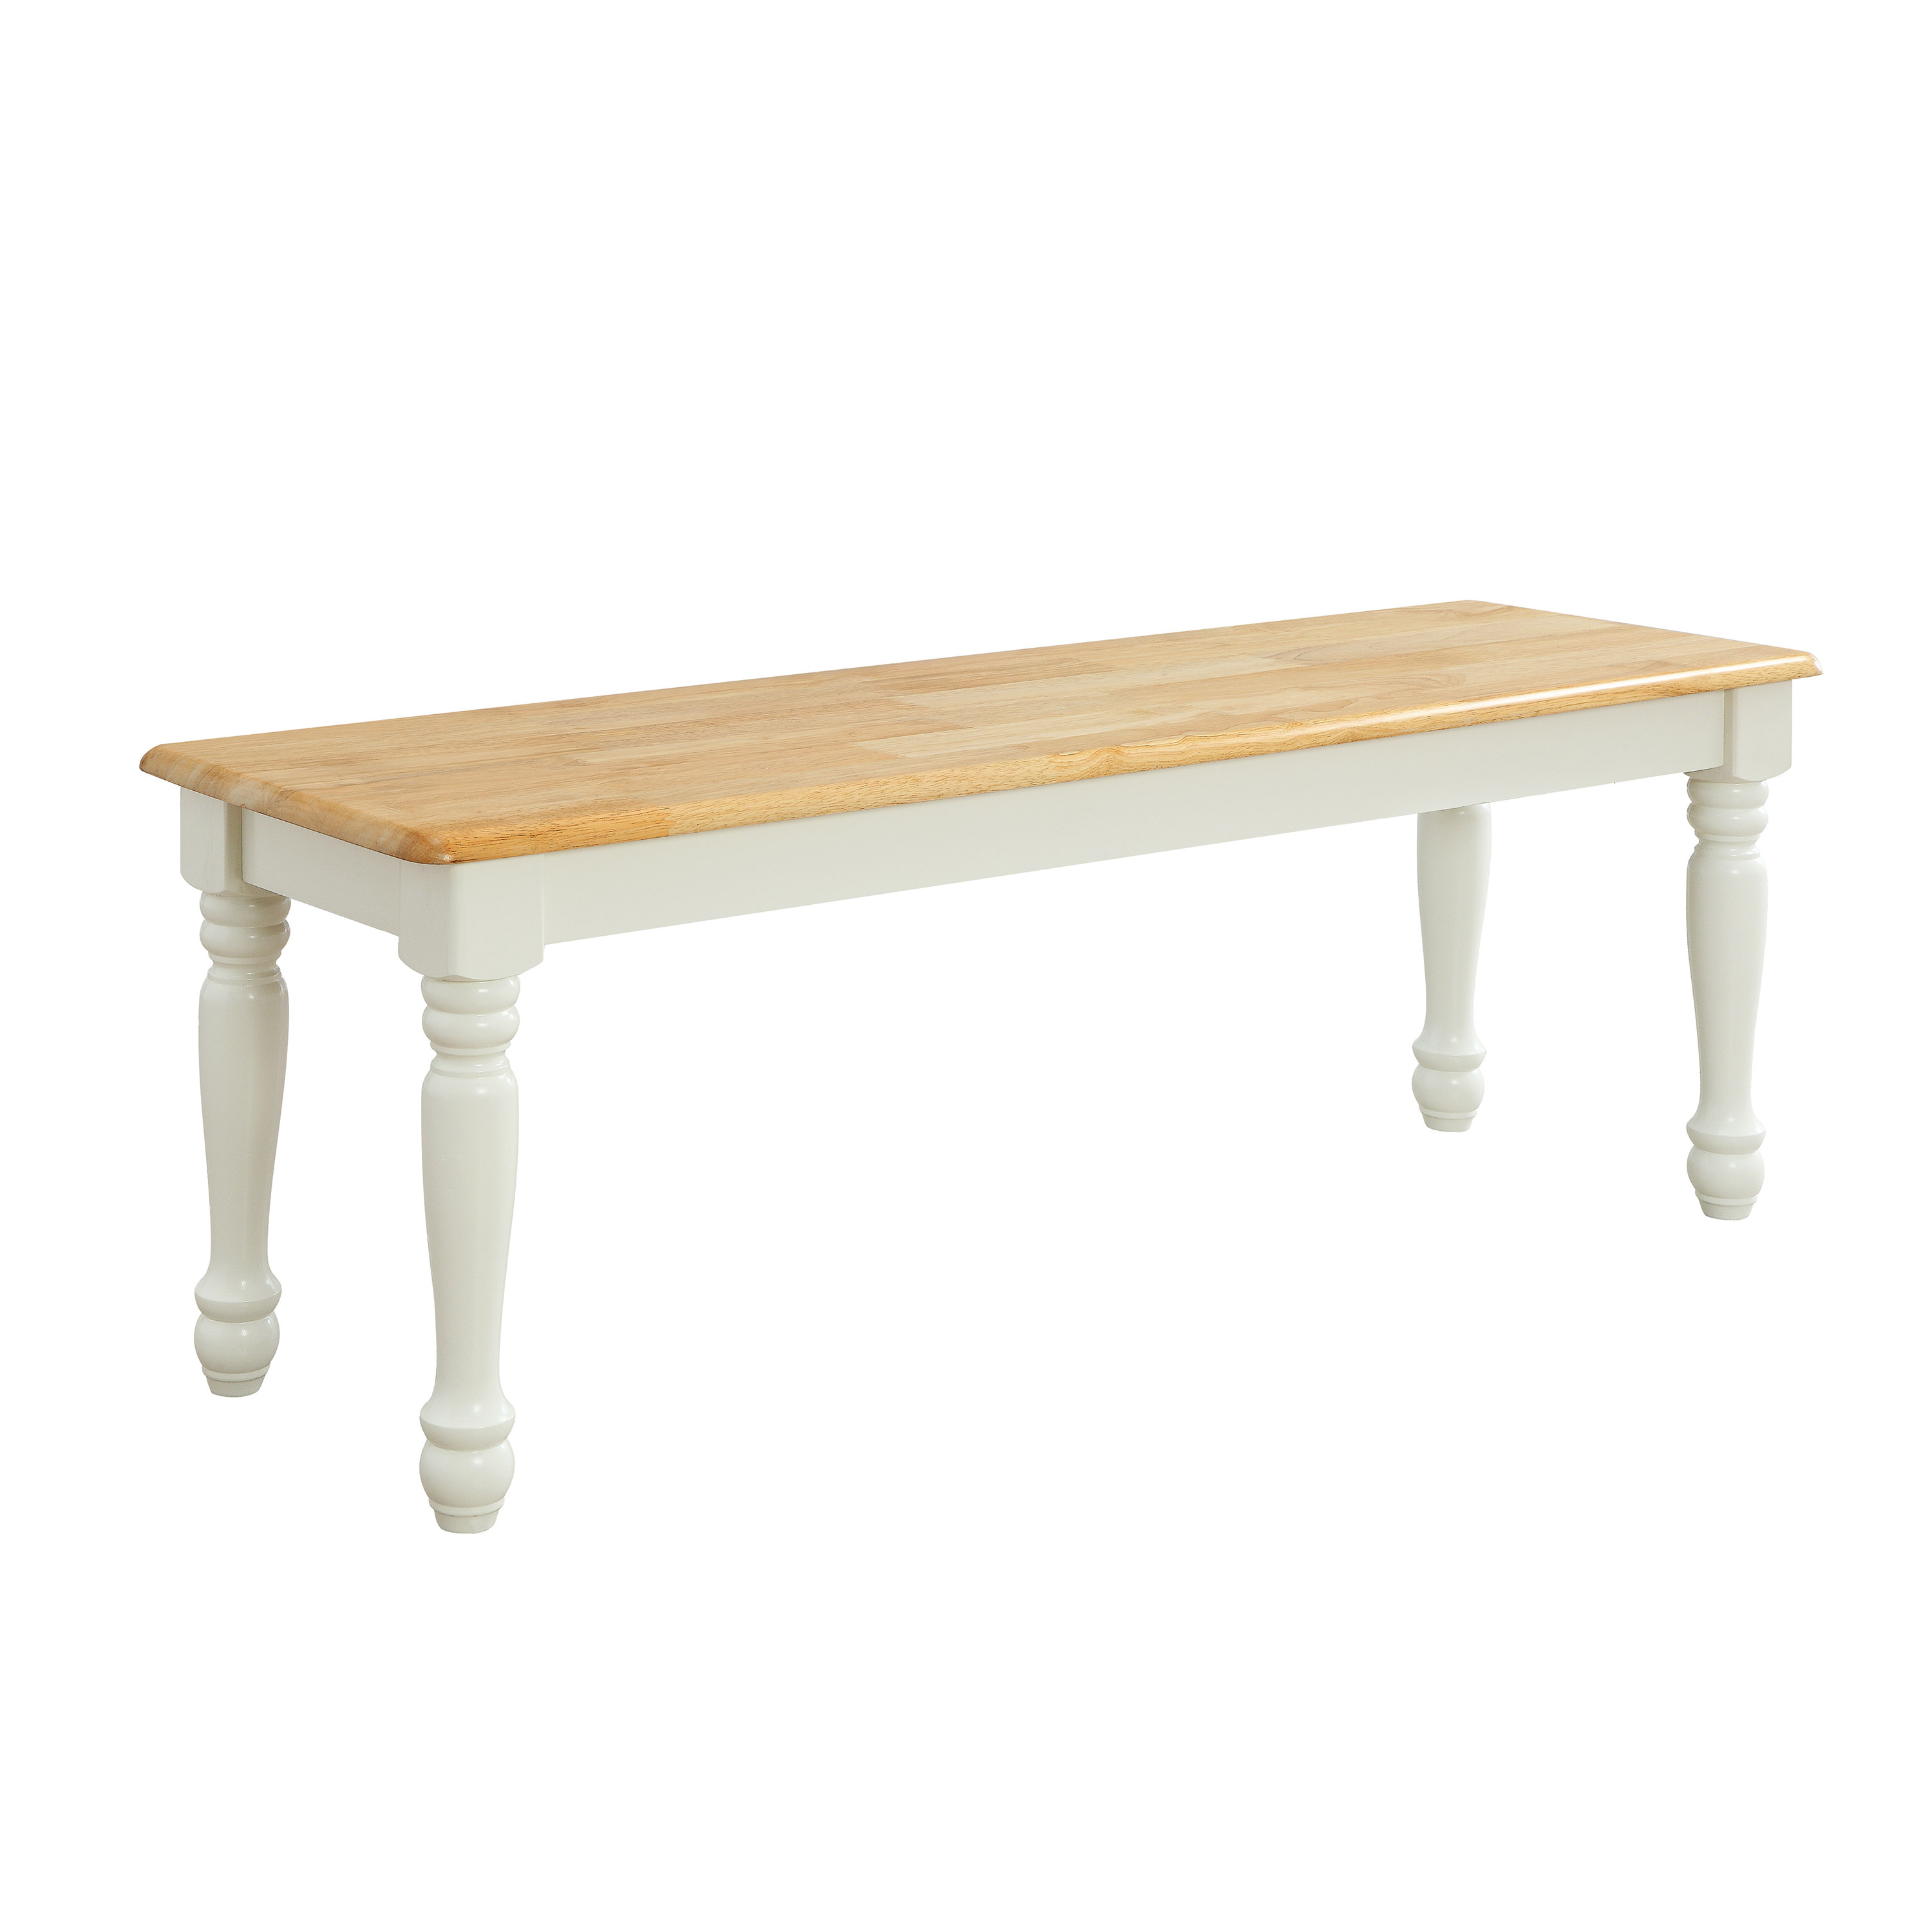 Better Homes & Gardens Autumn Lane Farmhouse Solid Wood Dining Bench, White and Natural Finish - image 1 of 6